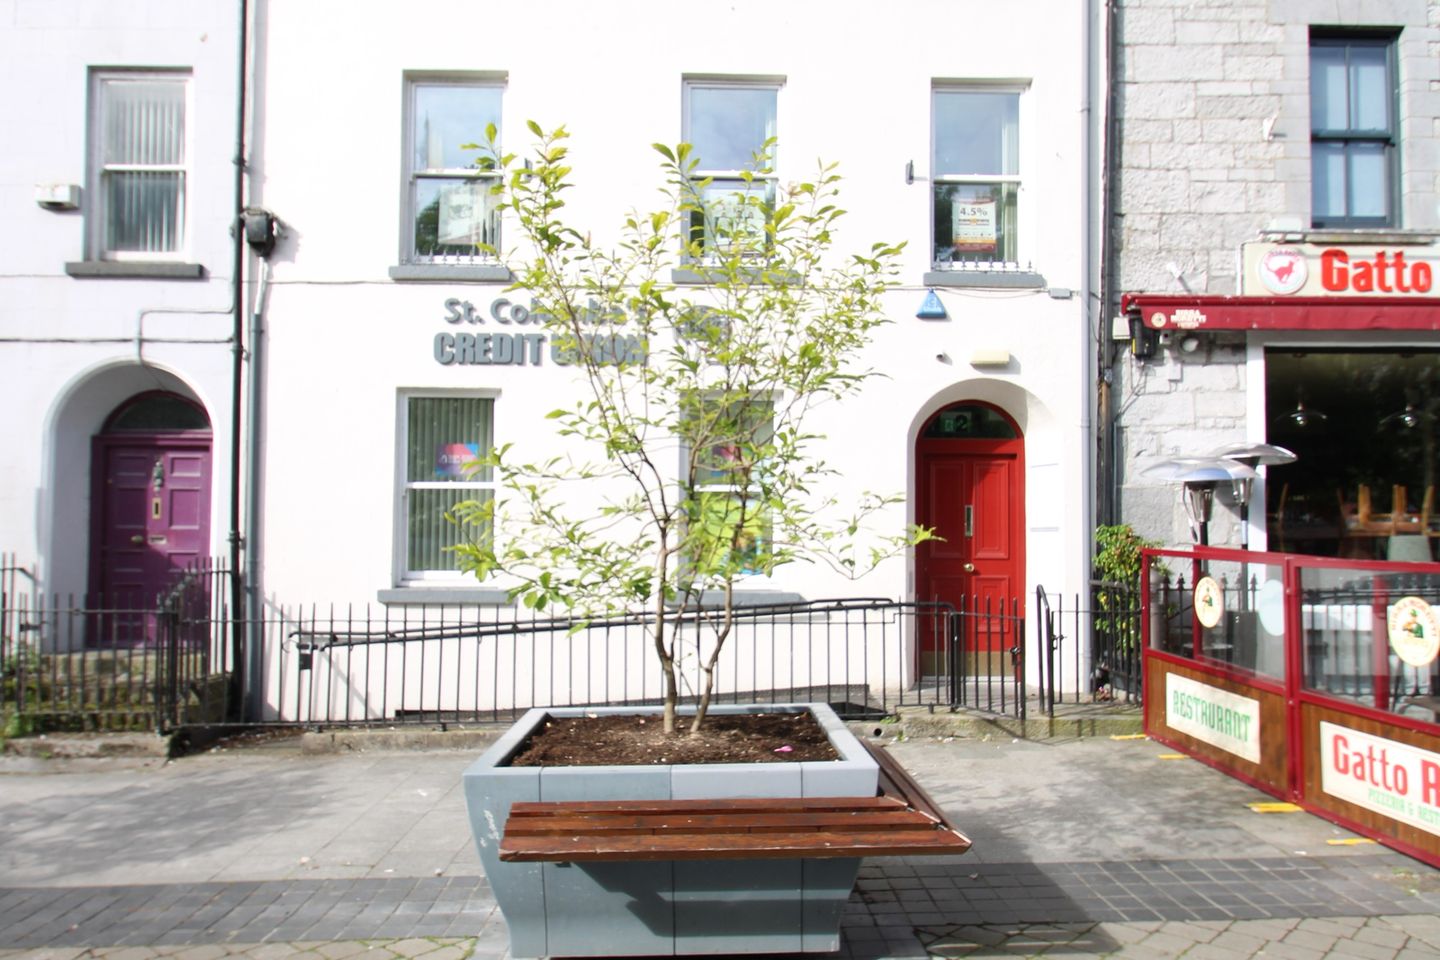 24 Eyre Square, Galway City, Co. Galway